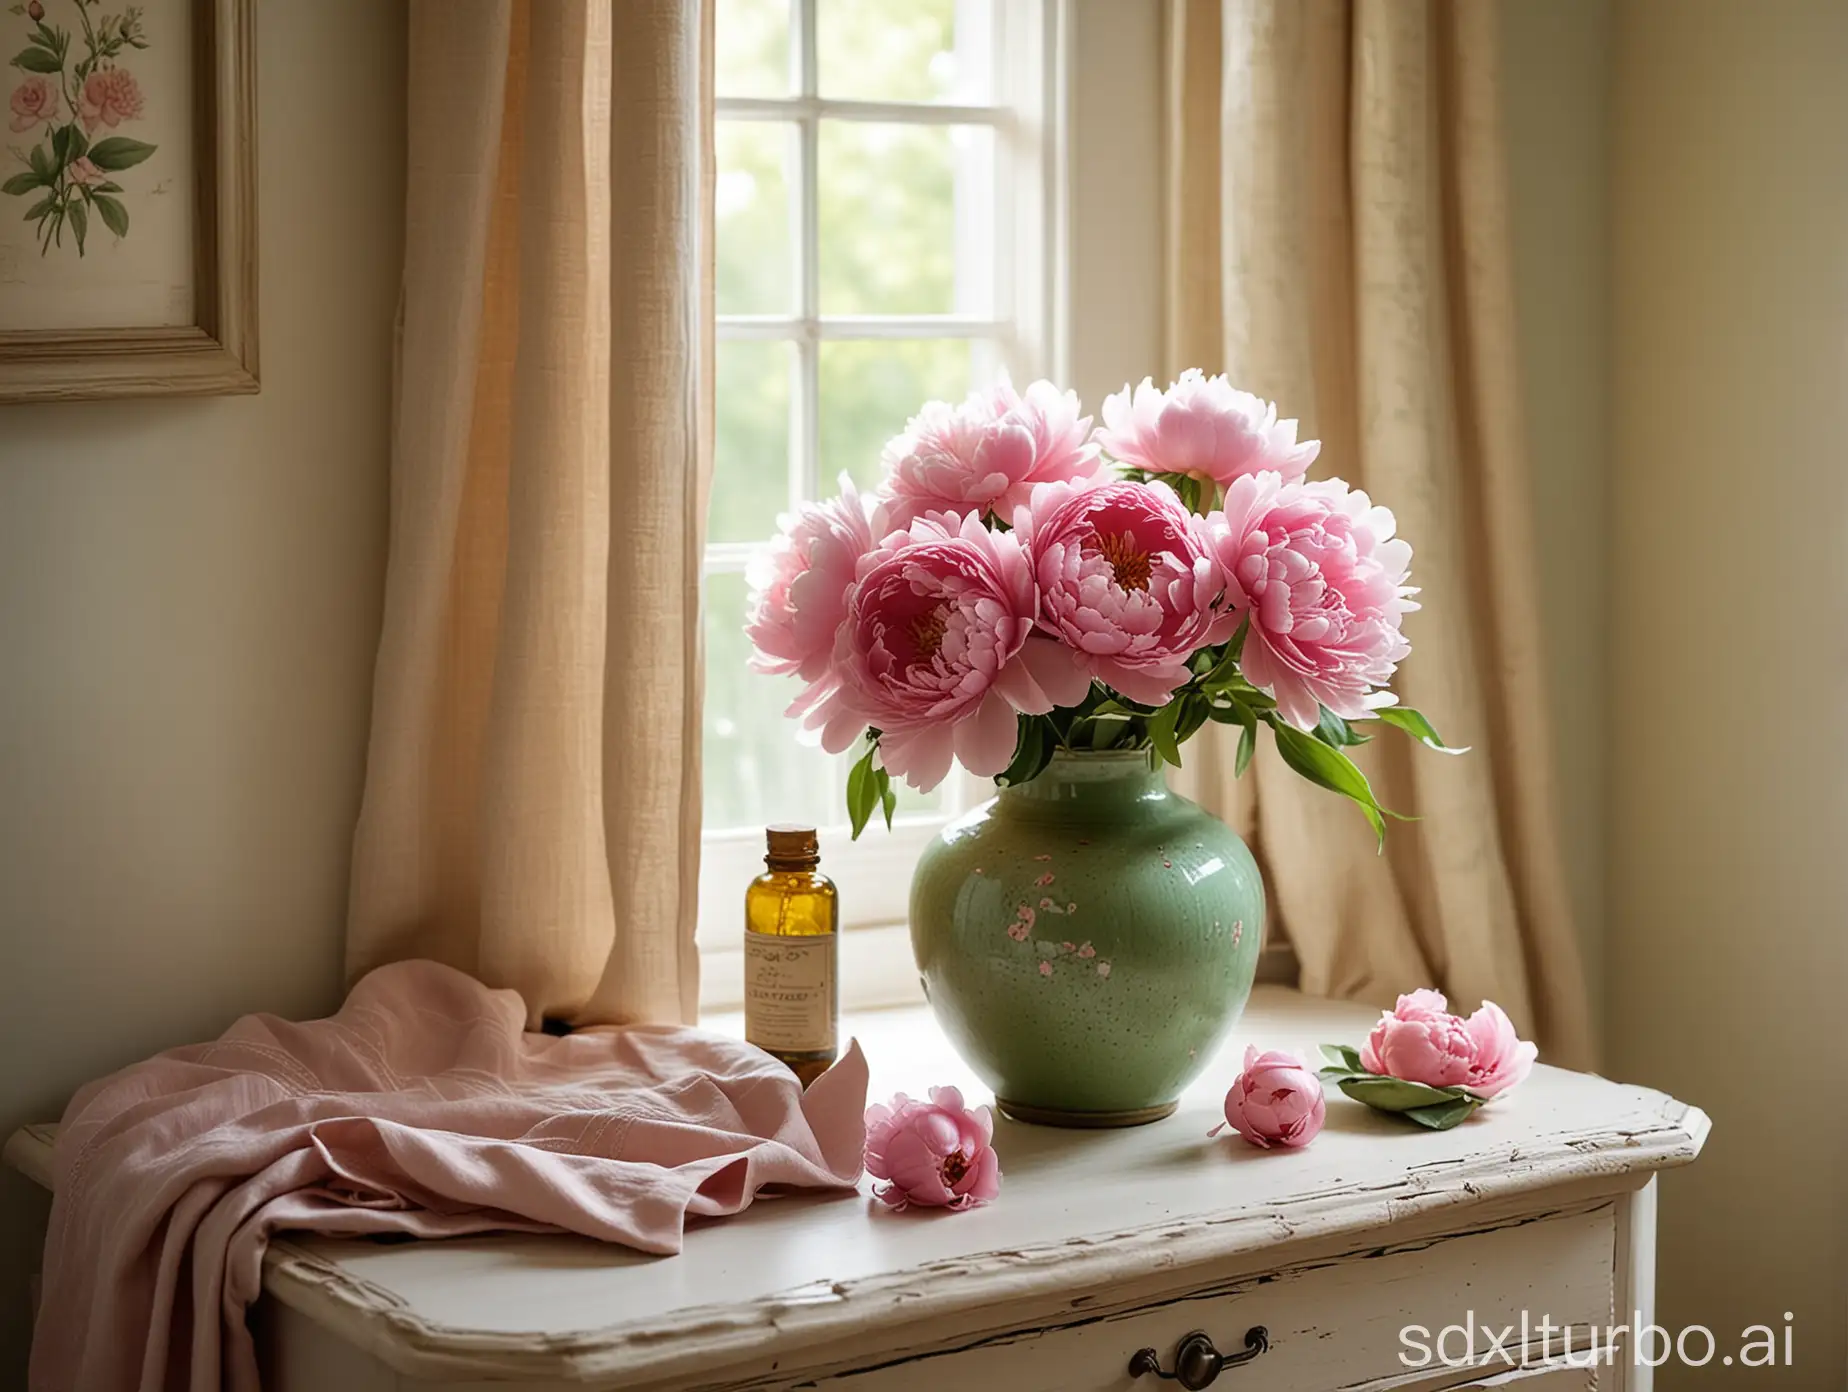 Serene-Bedside-Table-with-Blooming-Peonies-in-Antique-Vase